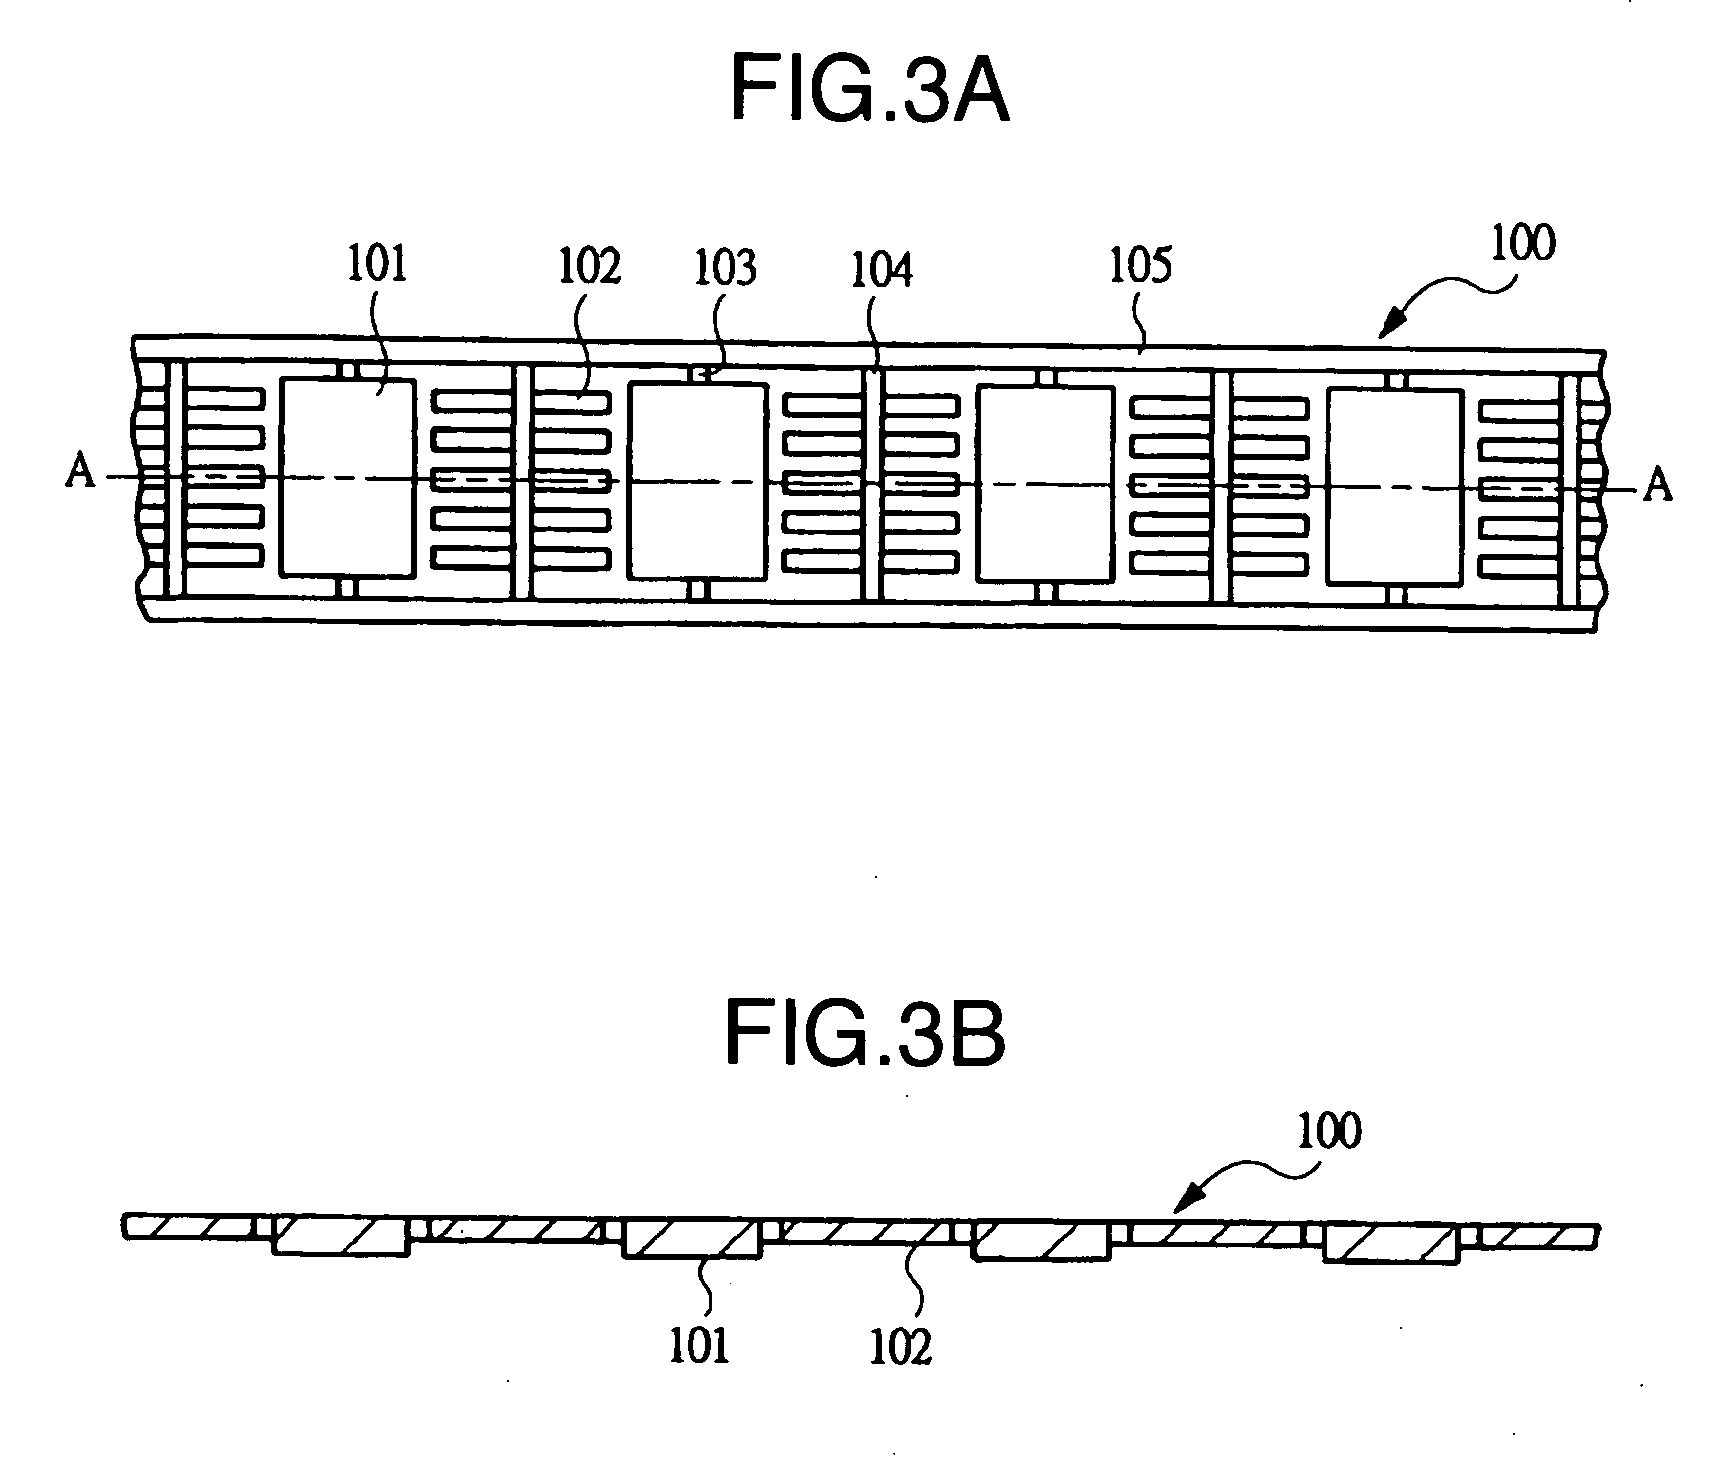 Semiconductor apparatus and manufacturing method